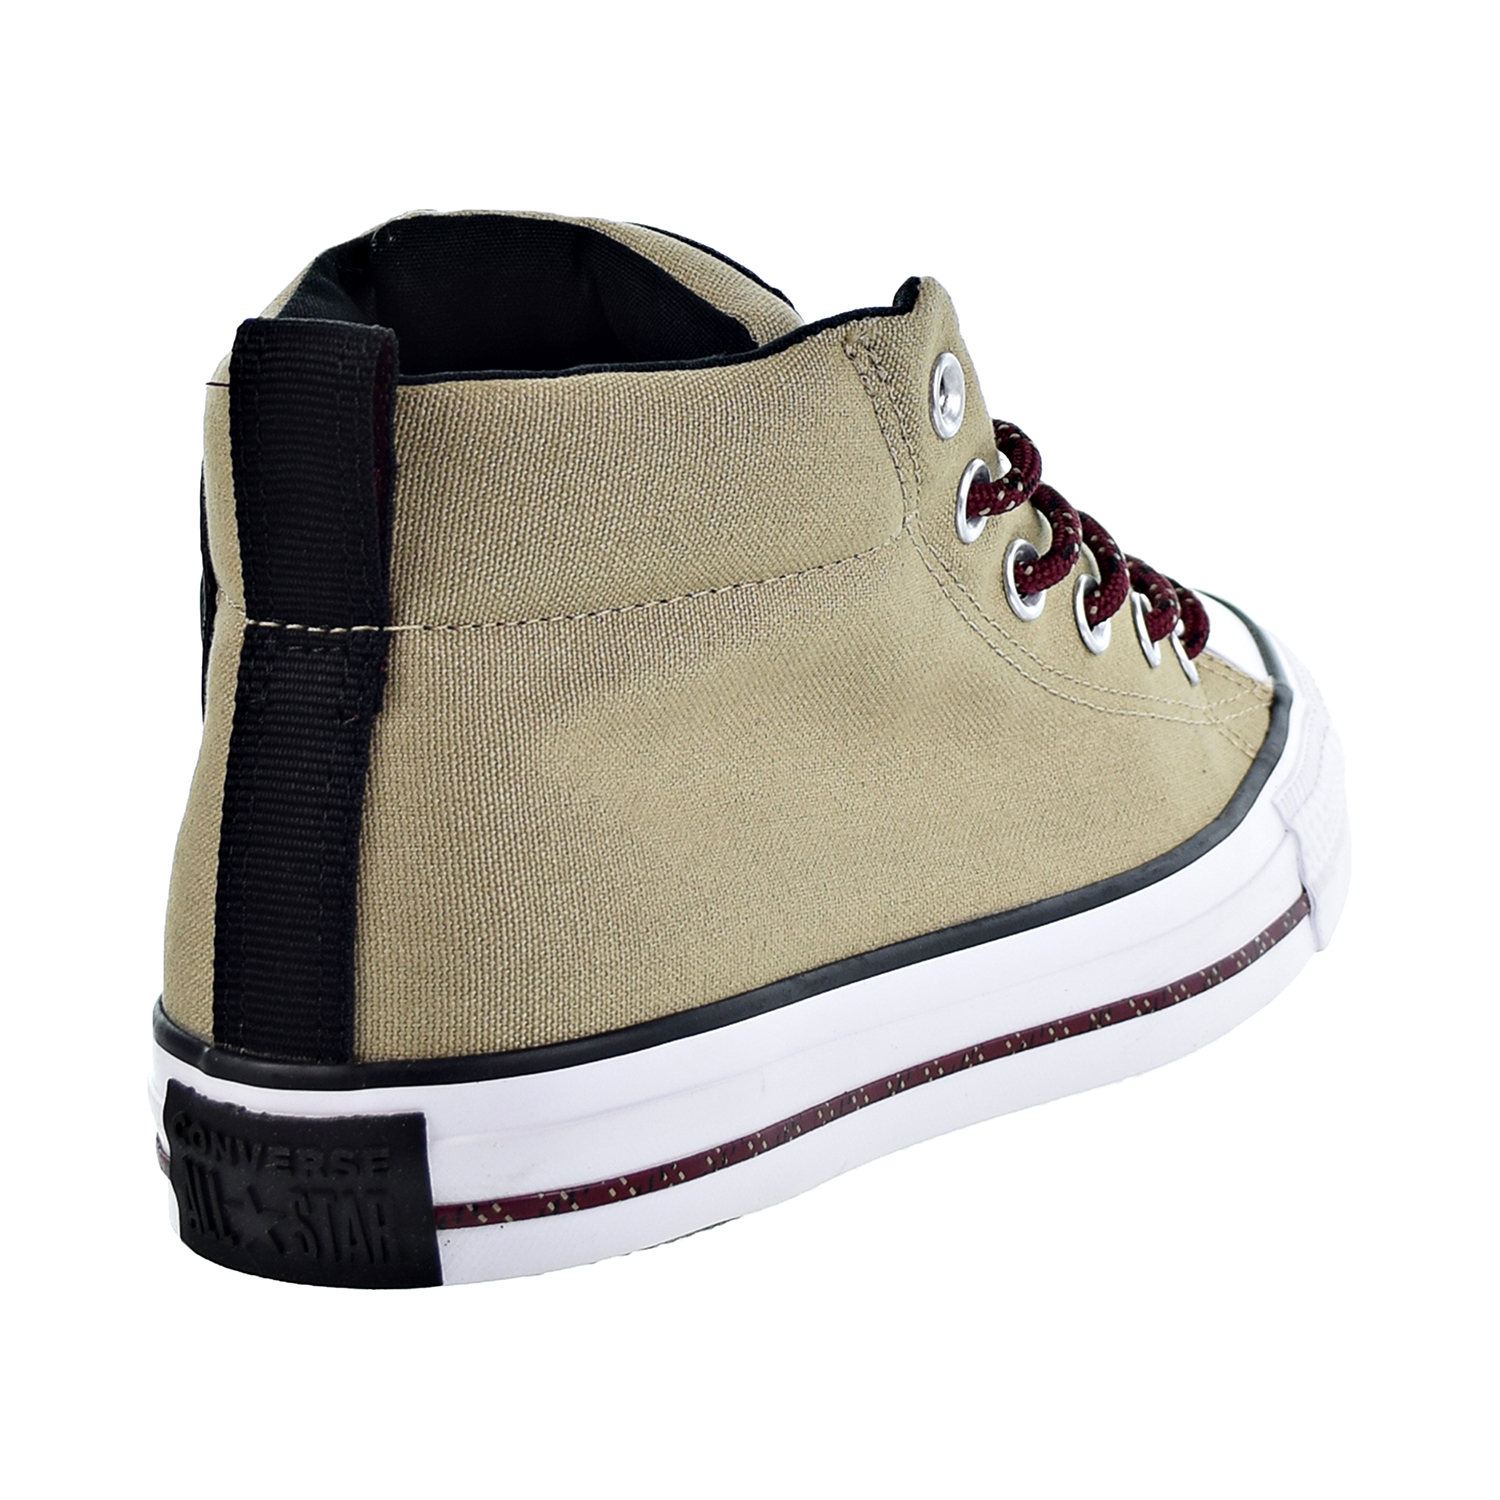 Converse Chuck Taylor All Star Street Mid Unisex Shoes Khaki/Black/White 162383f - image 3 of 6